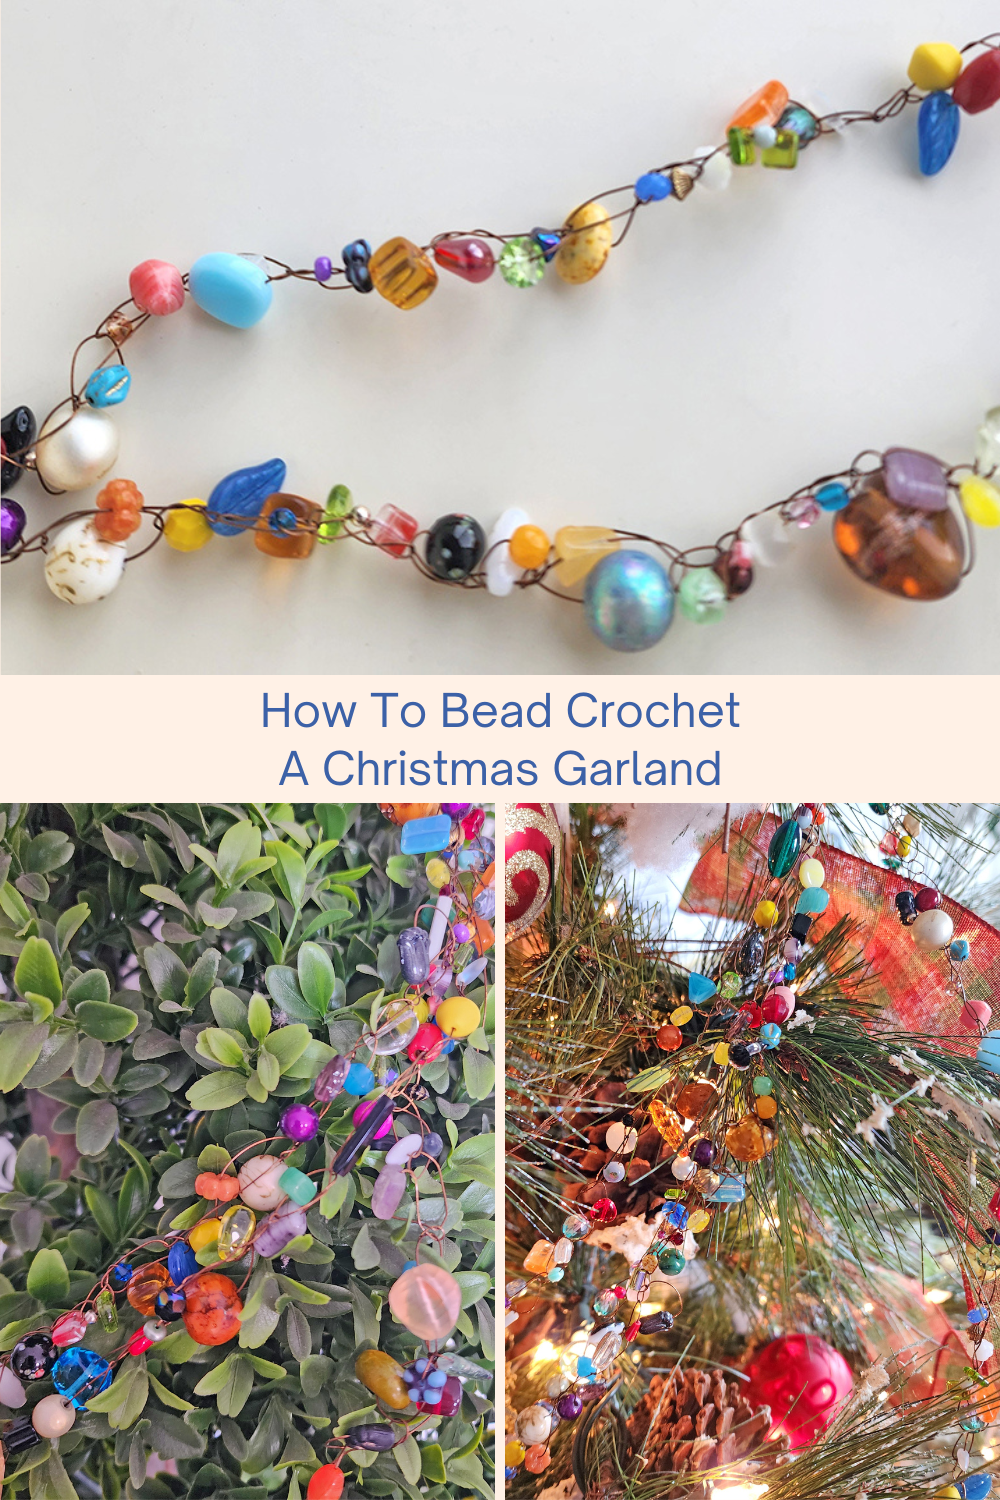 How To Bead Crochet A Christmas Garland Collage